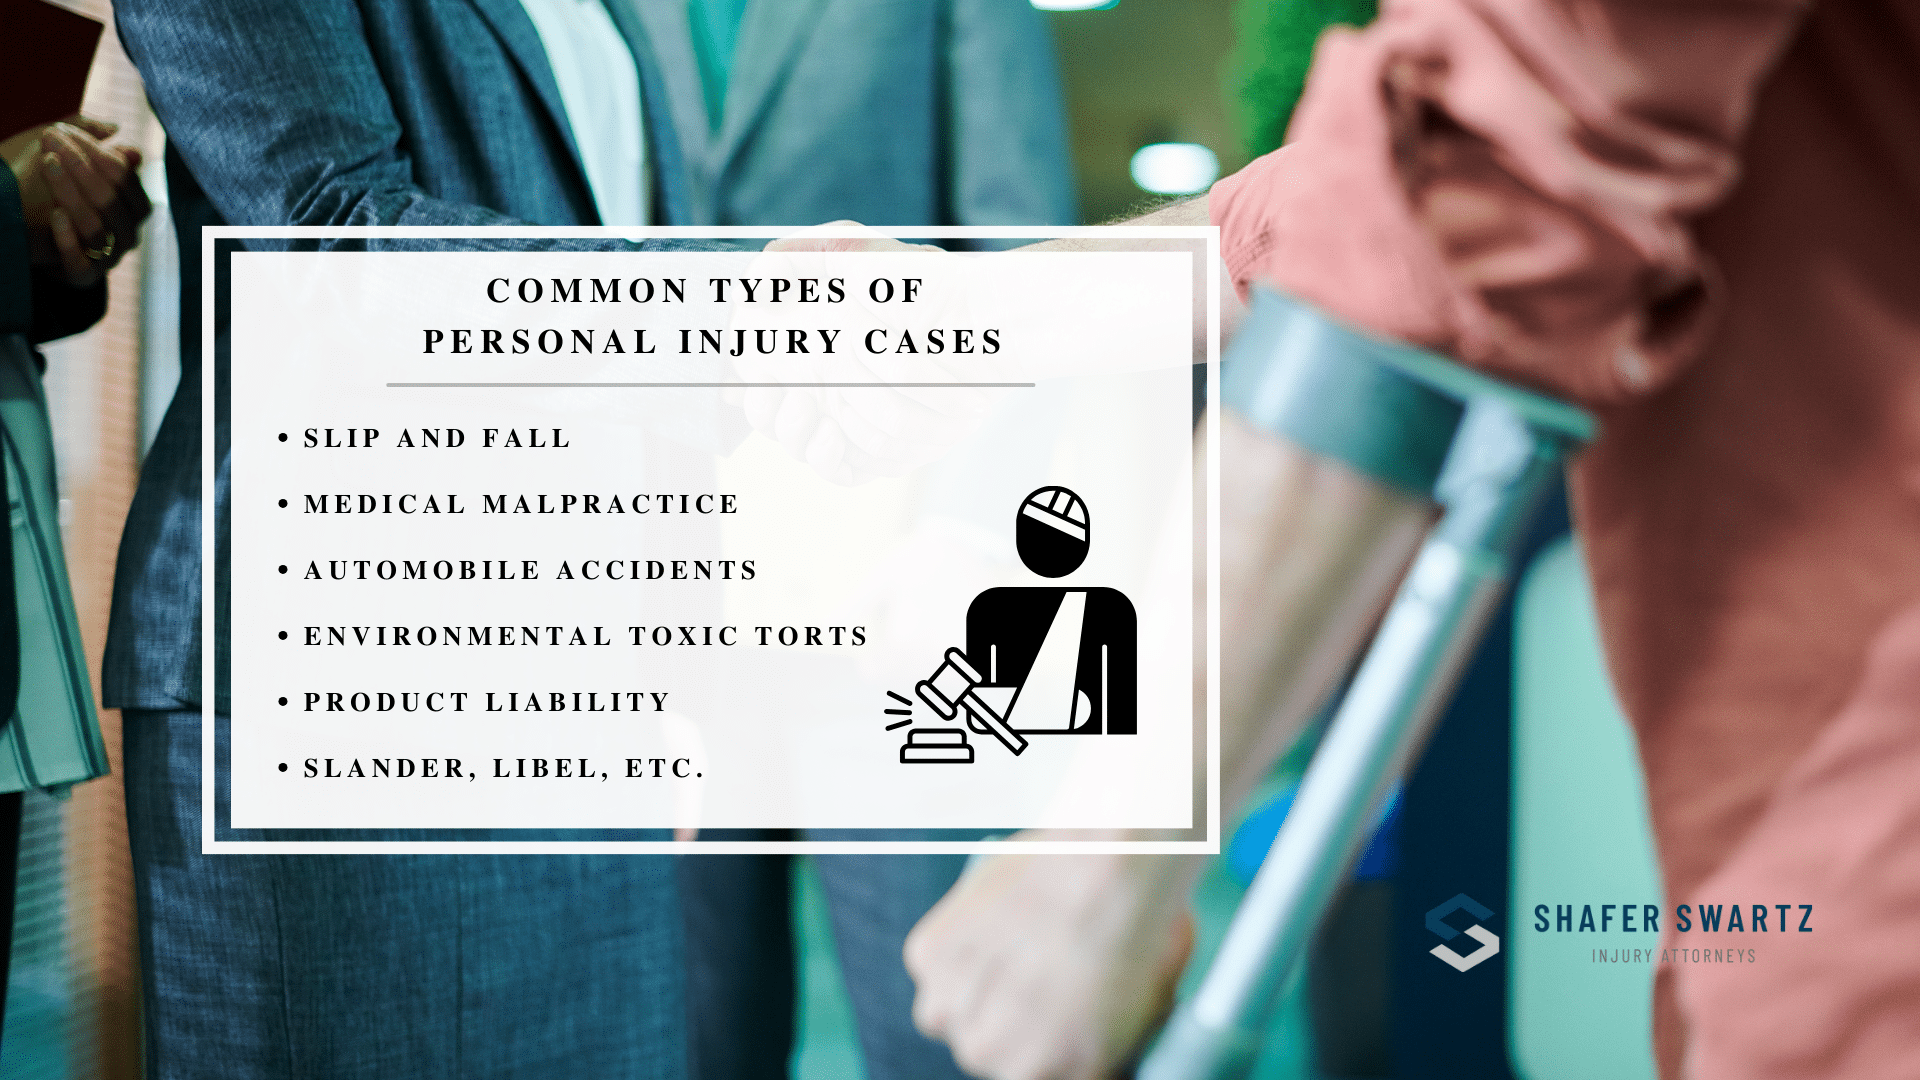 Infographic image of common types of personal injury cases